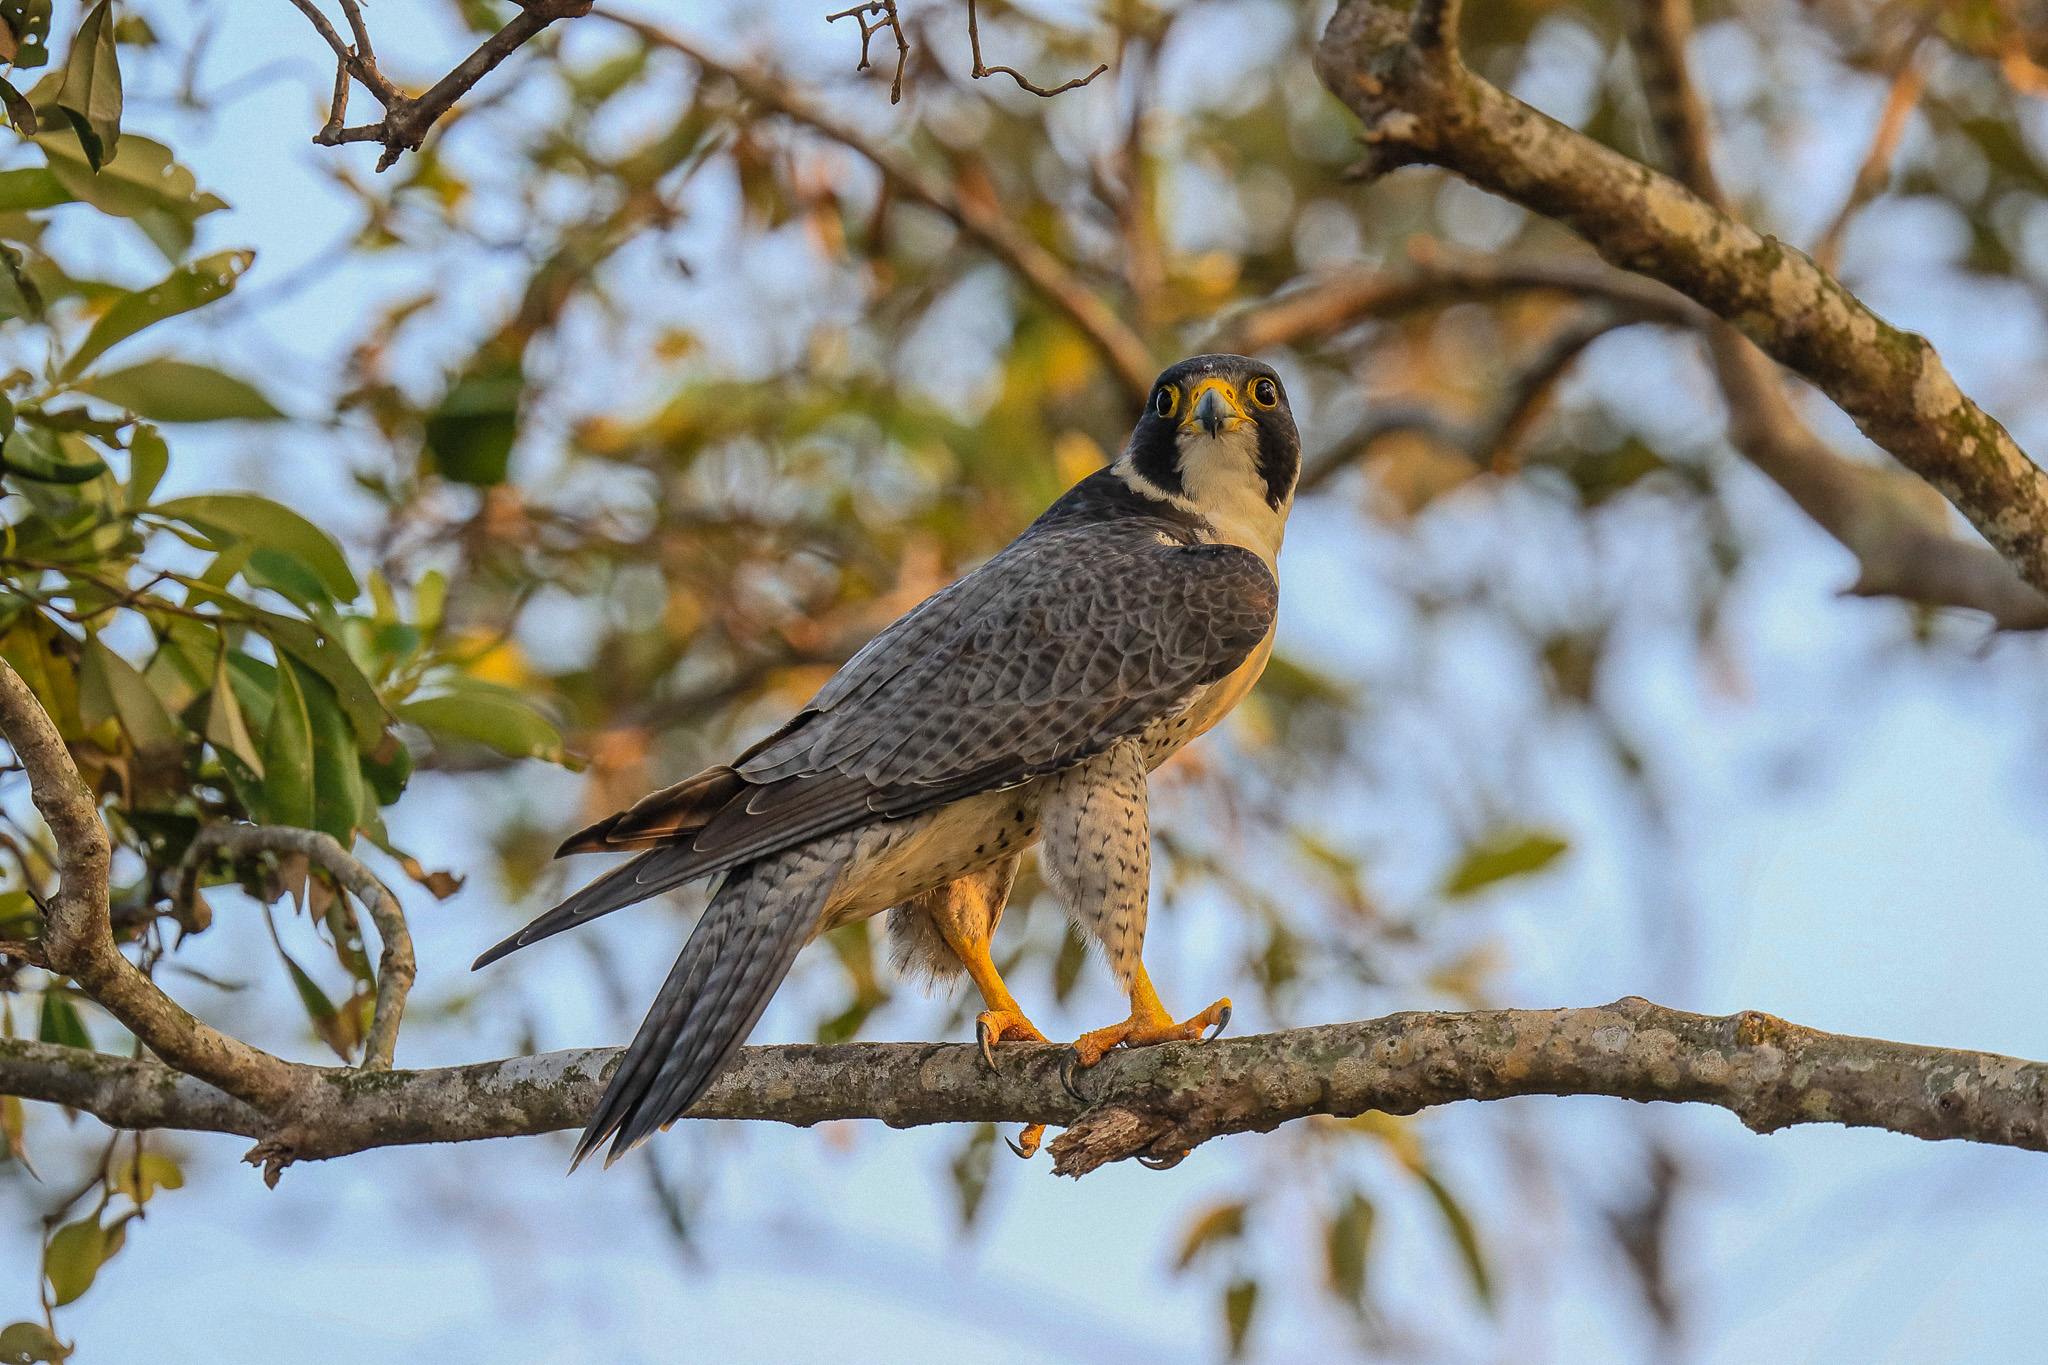 Peregrine falcon perched on a branch in Sundarbans, India